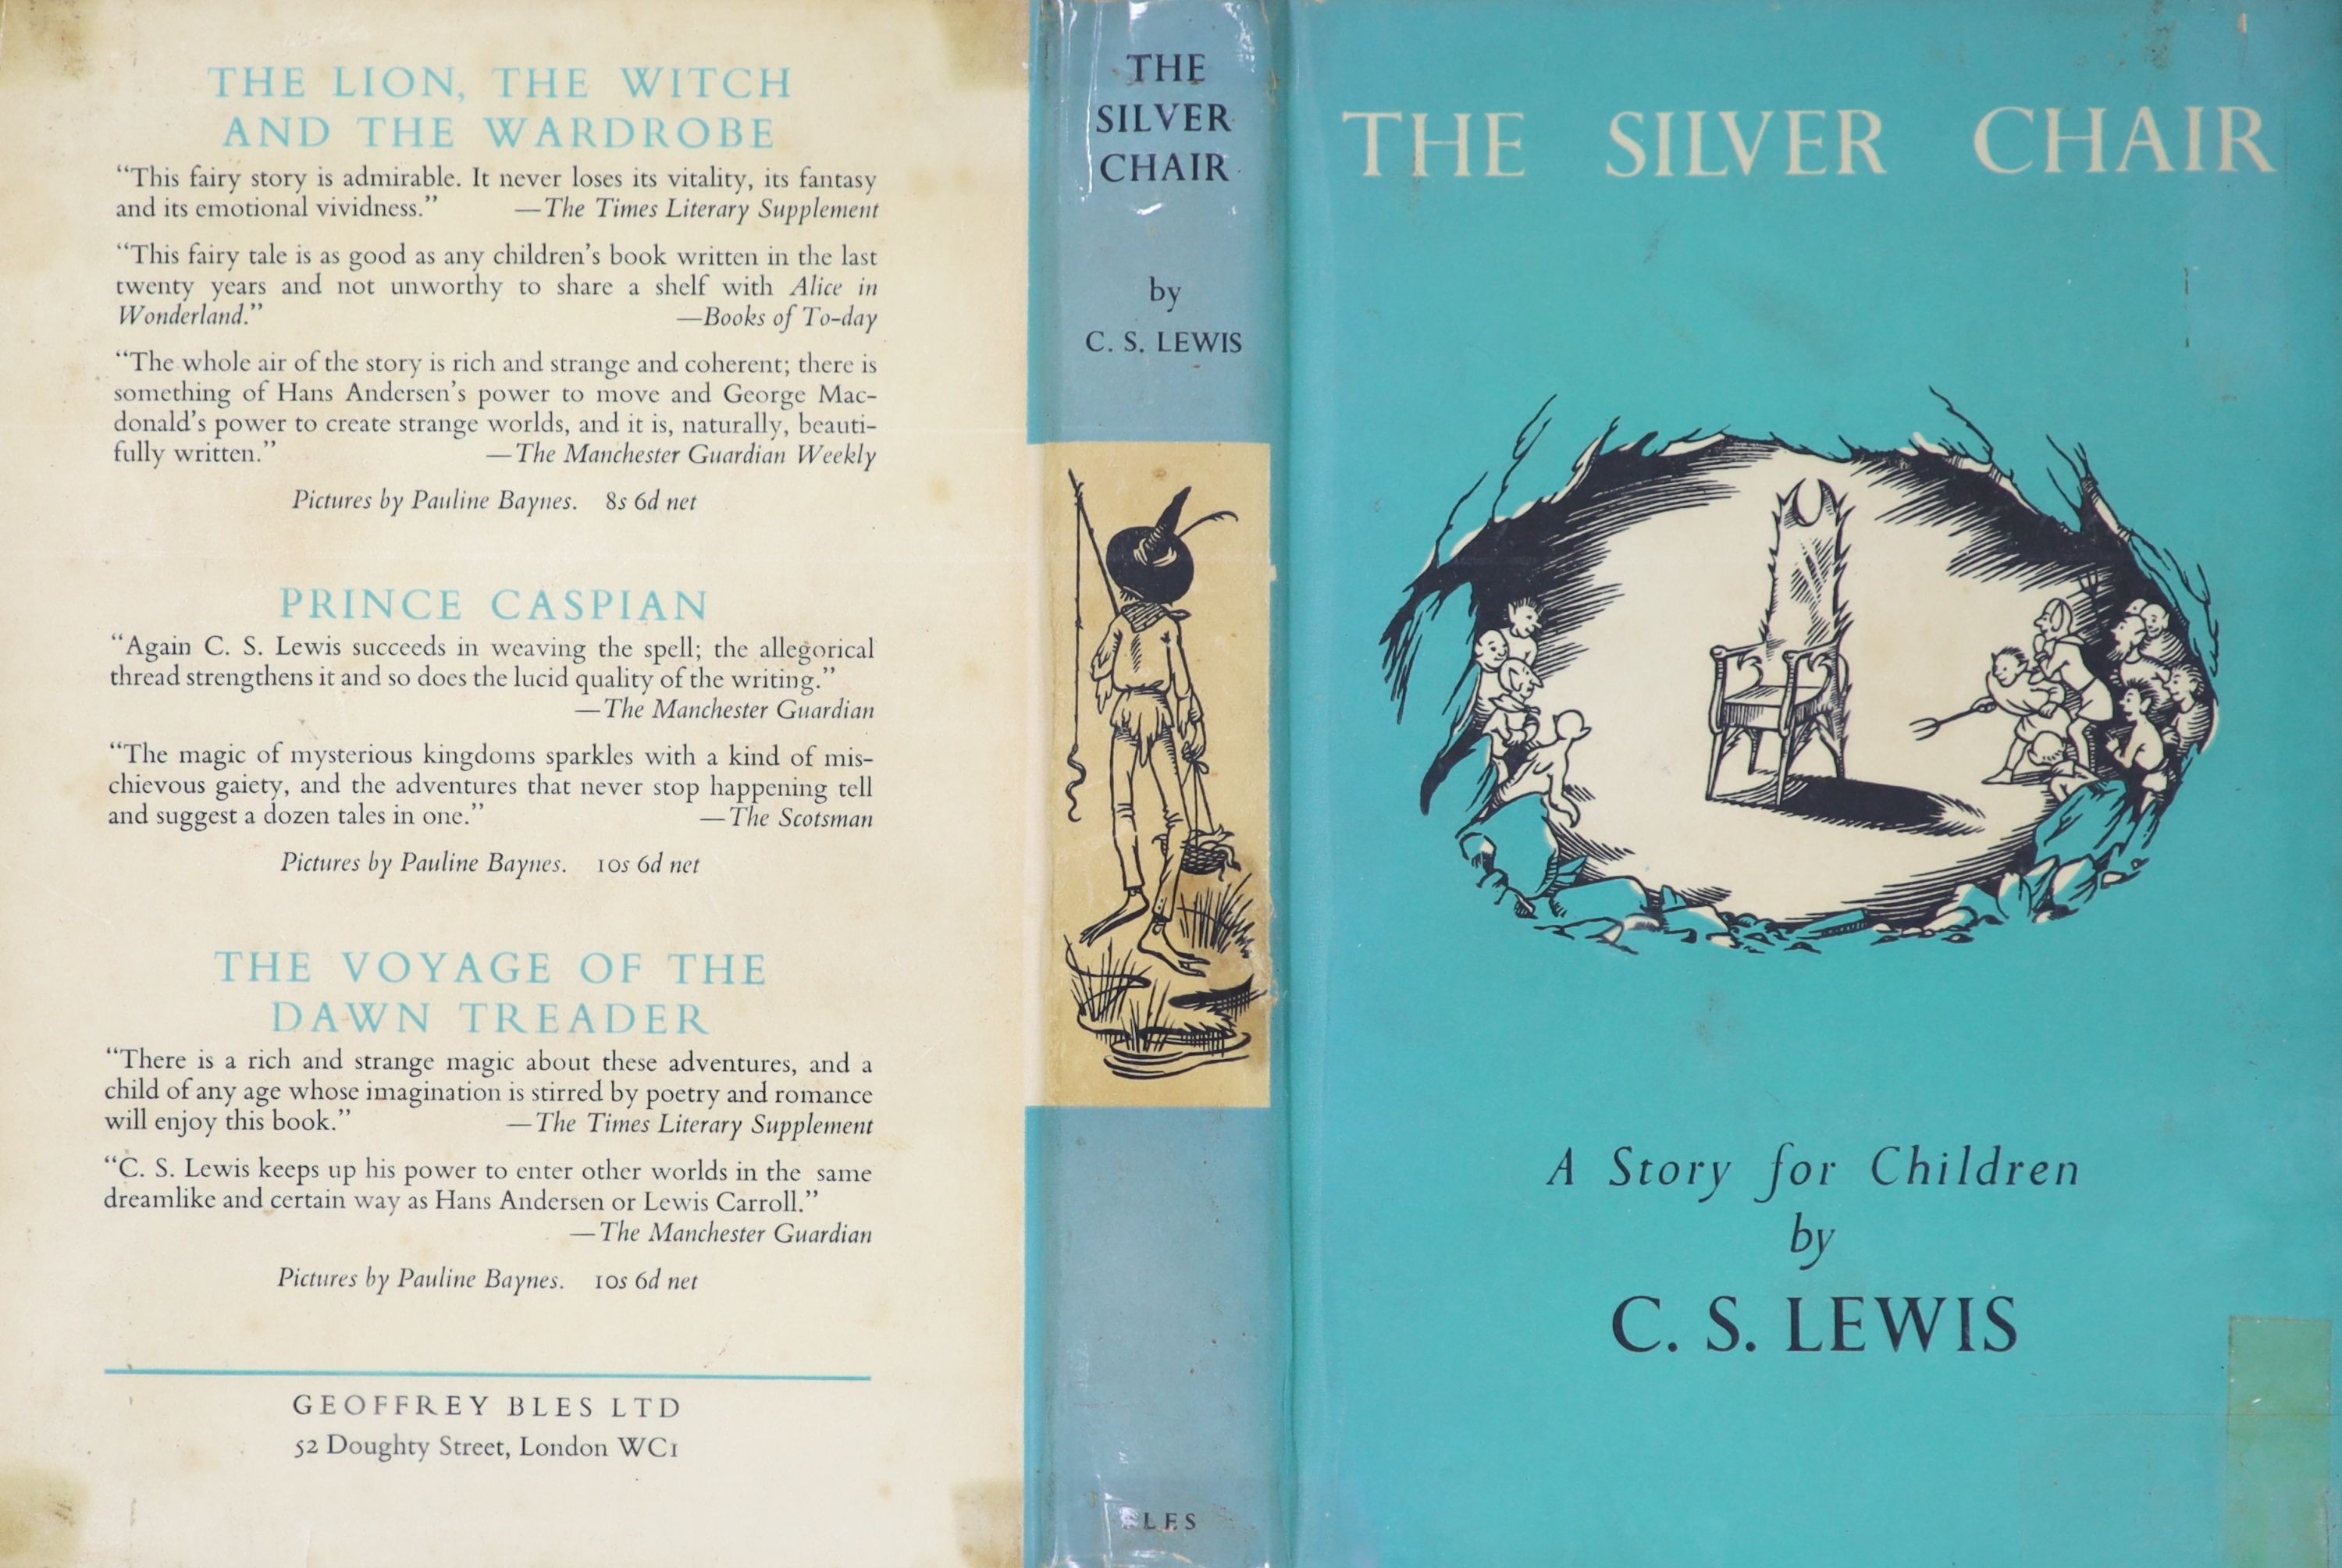 Lewis, Clive Staples - The Silver Chair, 1st edition, 8vo, illustrated by Pauline Baynes, original cloth, in an unclipped d/j, with hole and tear to front flap, Geoffrey Bles, London, 1953